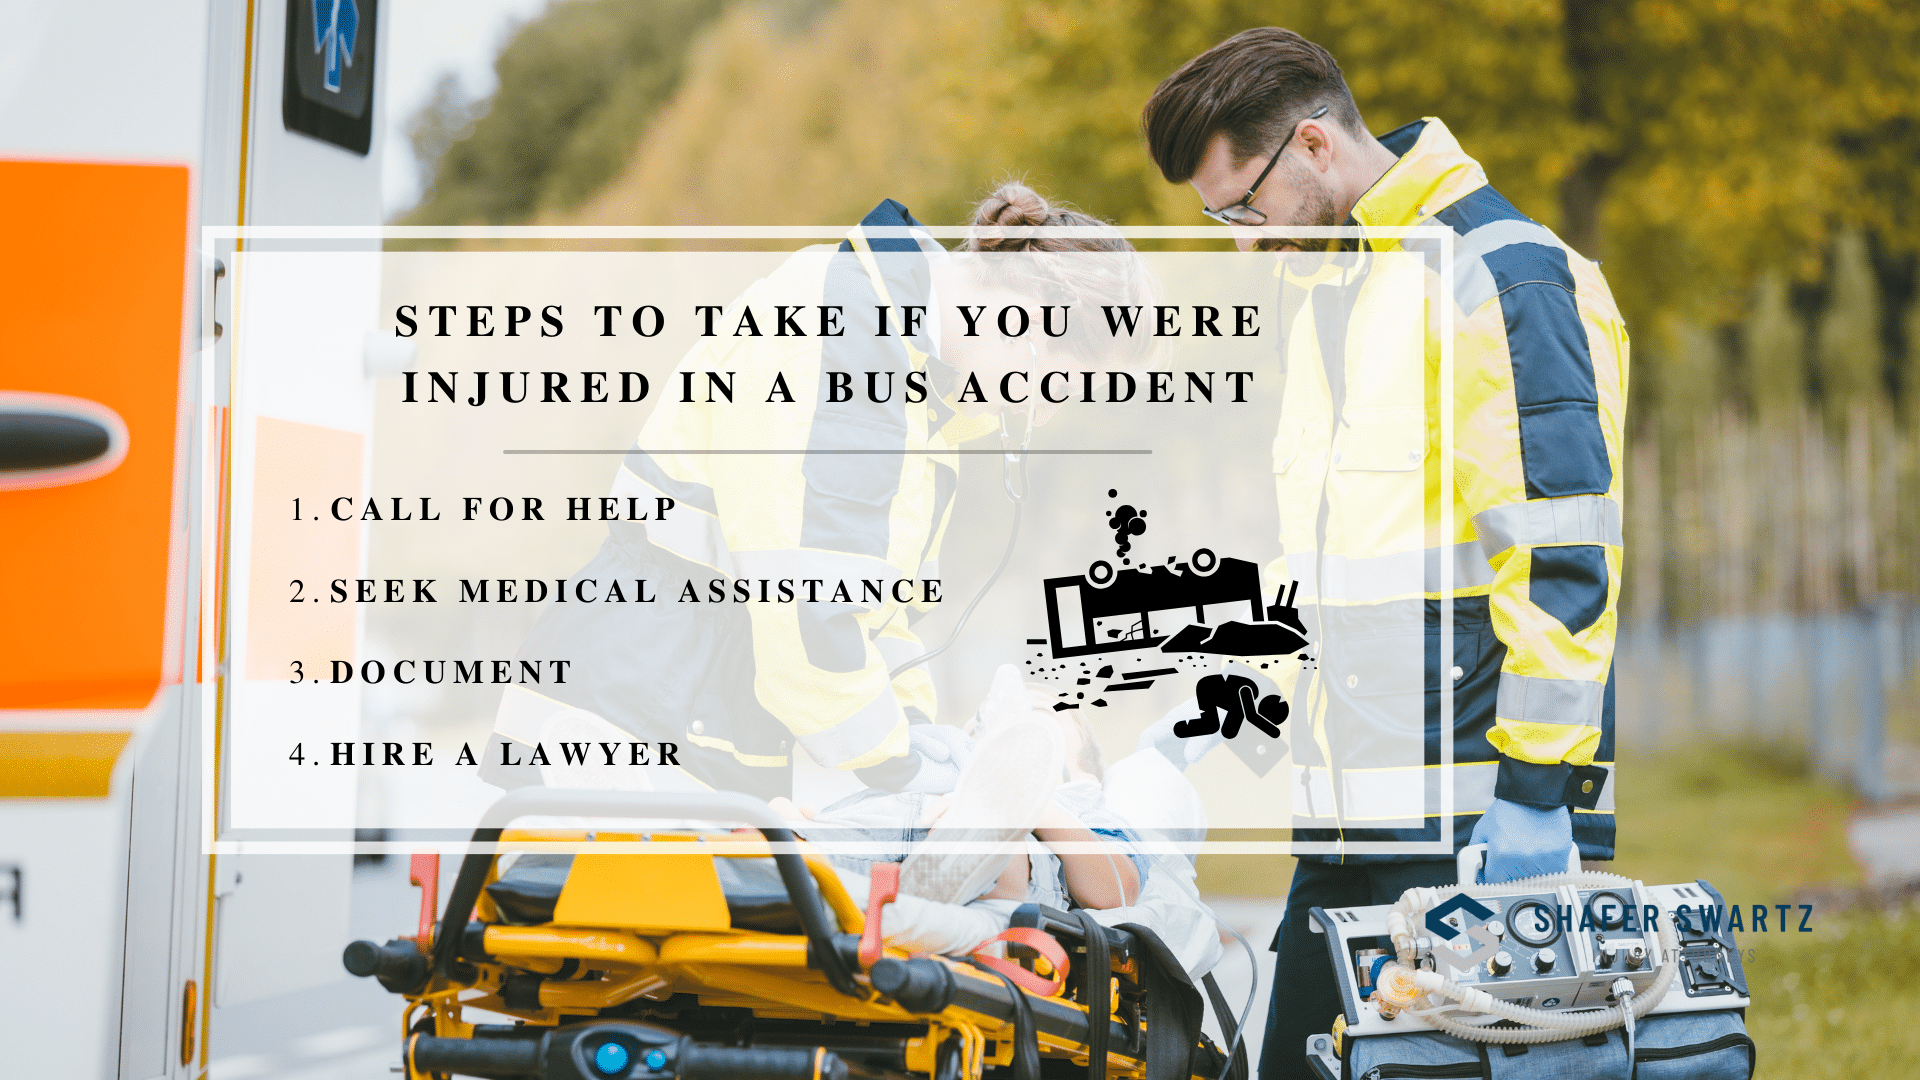 Infographic image of steps to take if you were injured in a bus accident